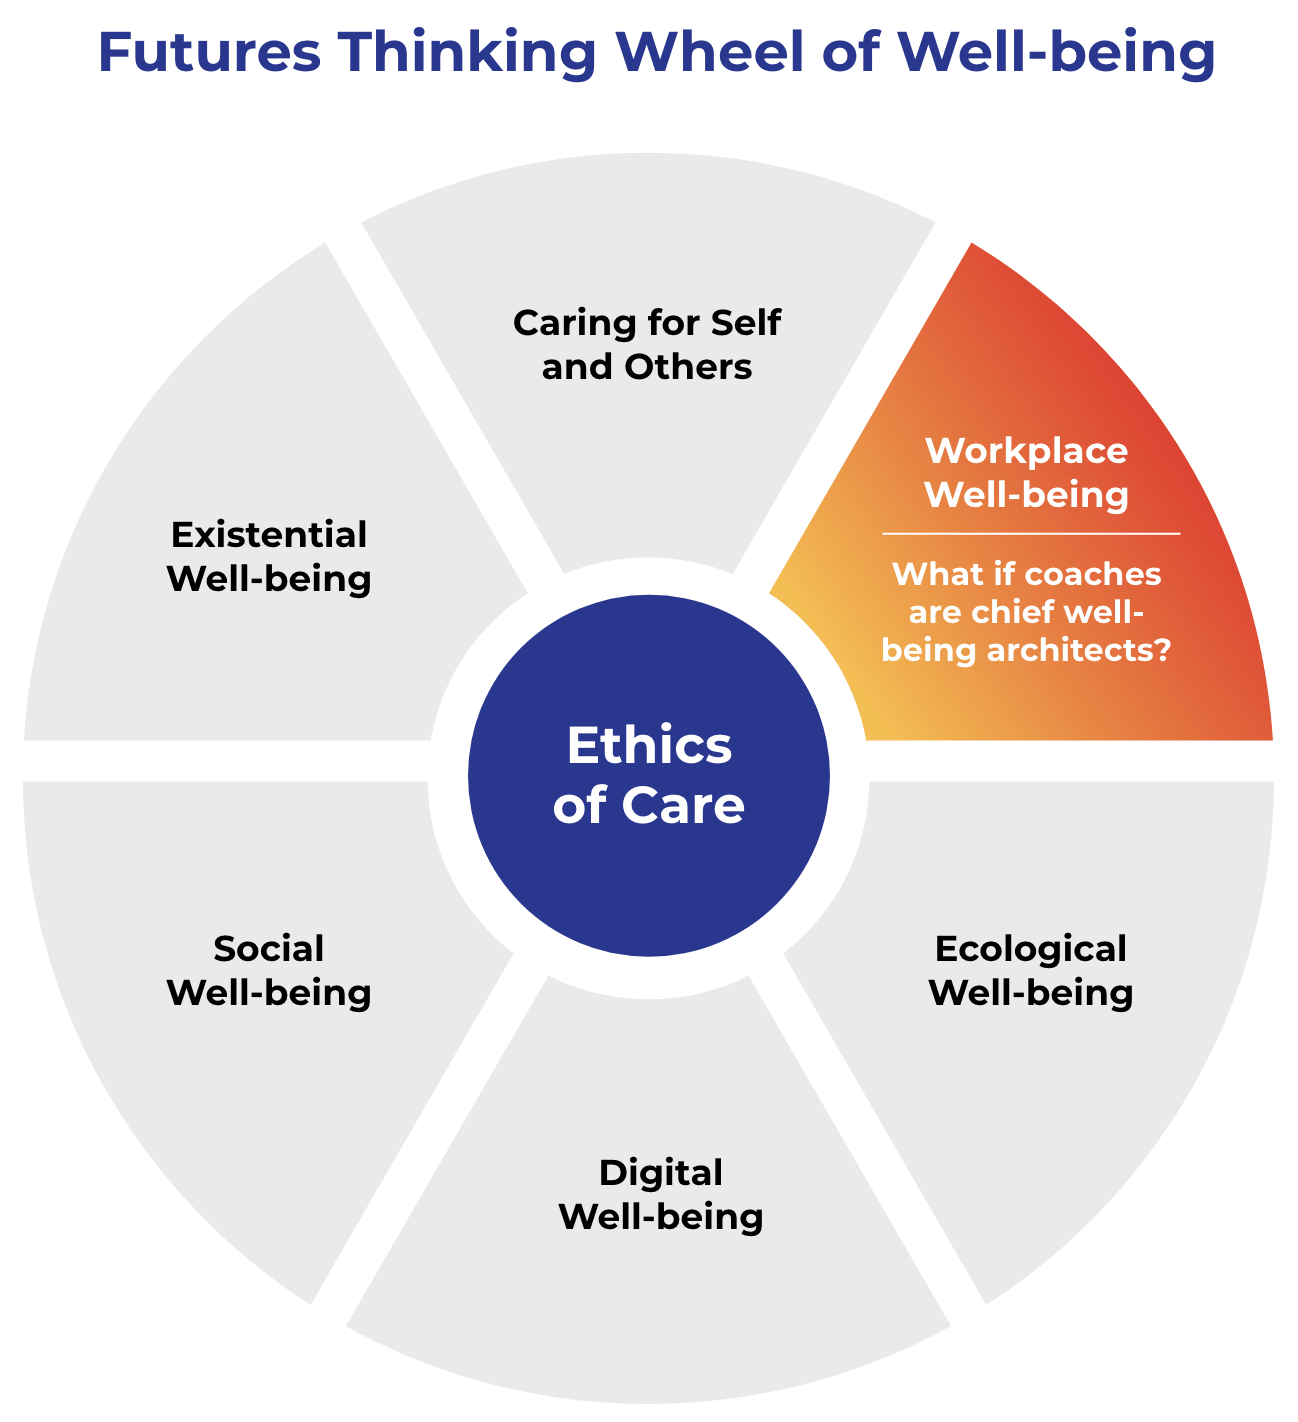 Futures Thinking Wheel of Well-Being: Centering Well-Being around Ethics of Care, the Wheel helps coaches think about domains of well-being including: care for self and others, workplace wellbeing, ecological wellbeing, digital wellbeing, social wellbeing, and existential wellbeing. 